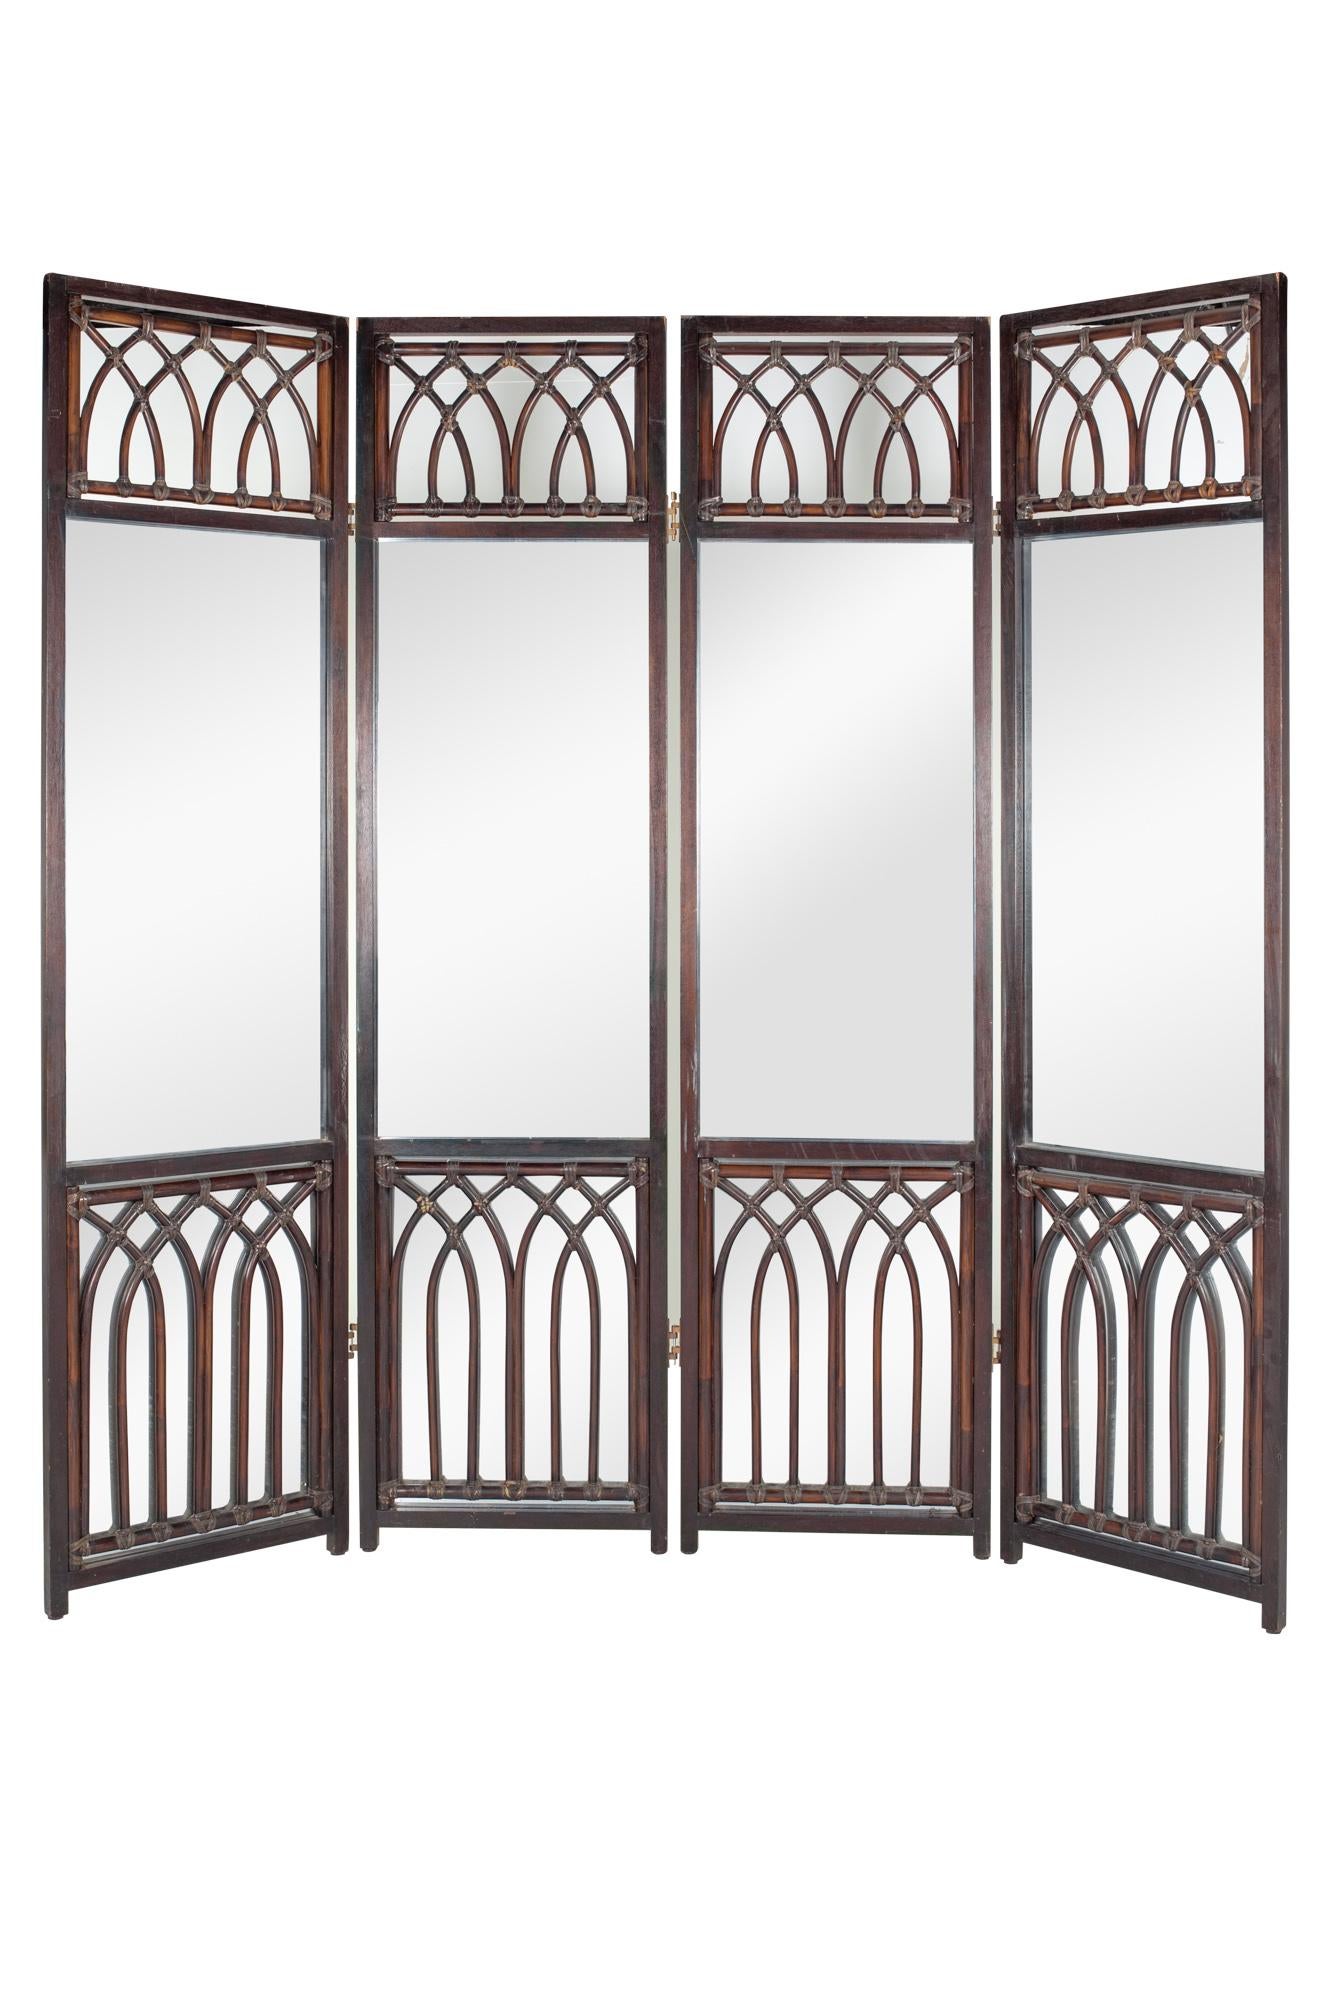 Mid century mirror and cane room divider

The room divider measures: 92 wide x 1.5 deep x 90 inches high

All pieces of furniture can be had in what we call restored vintage condition. That means the piece is restored upon purchase so it’s free